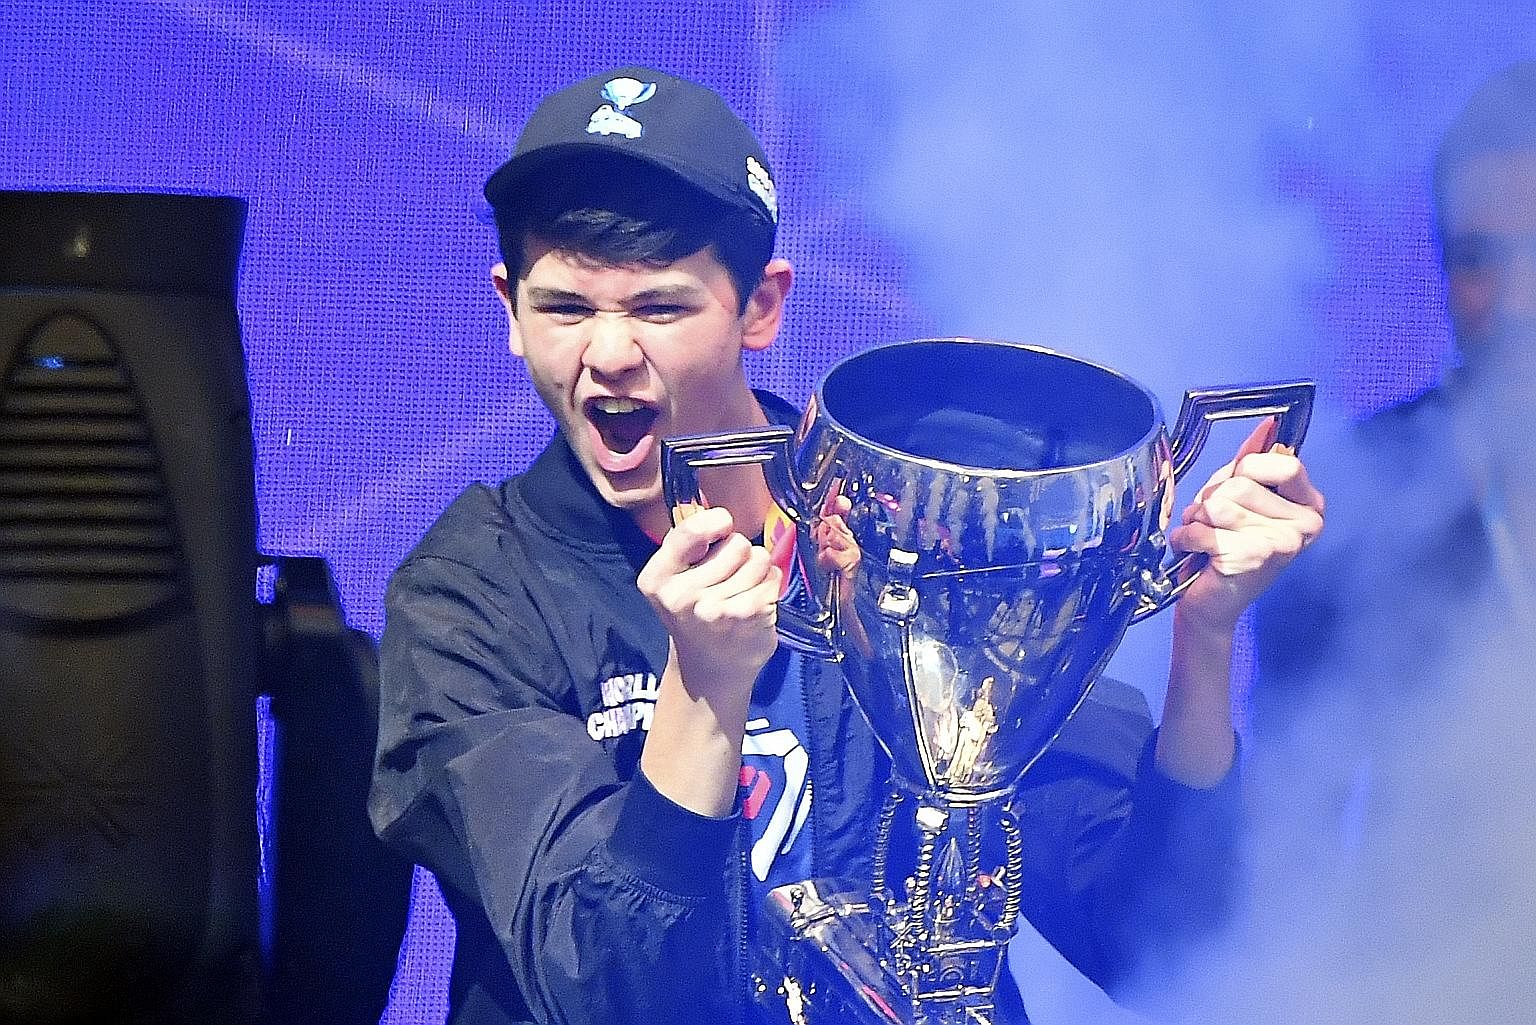 American Kyle "Bugha" Giersdorf pocketed US$3 million (S$4.11 million) after winning the Fortnite World Cup Finals solo category on Sunday in New York. The 16-year-old scored 59 points over six games, almost double the 33 points scored by runner-up "